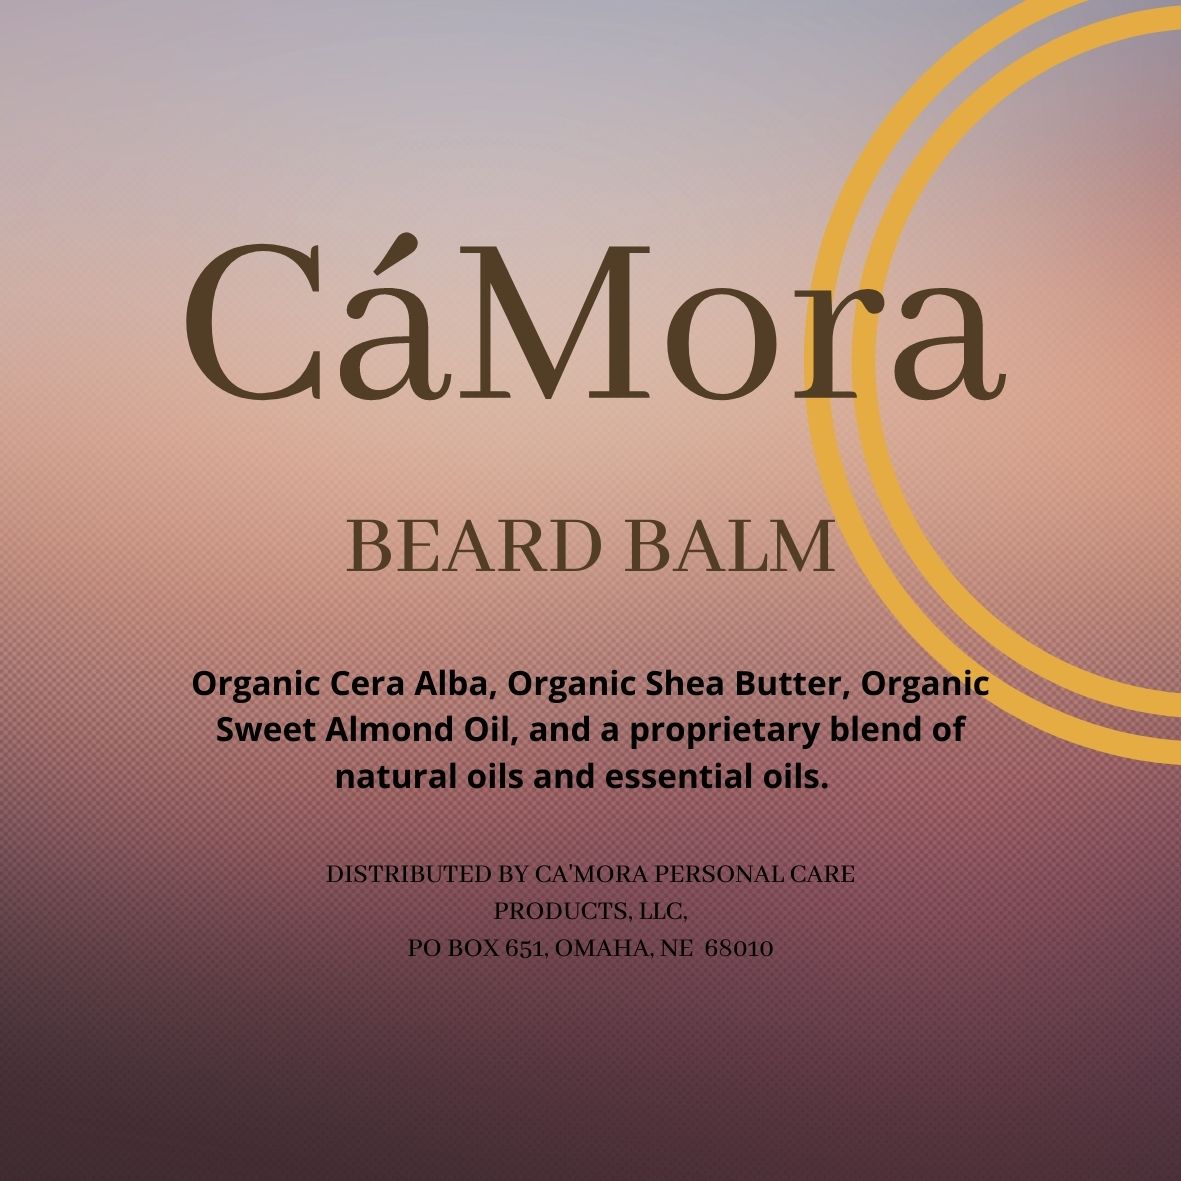 Ca'Mora beard balm label with ingredients.